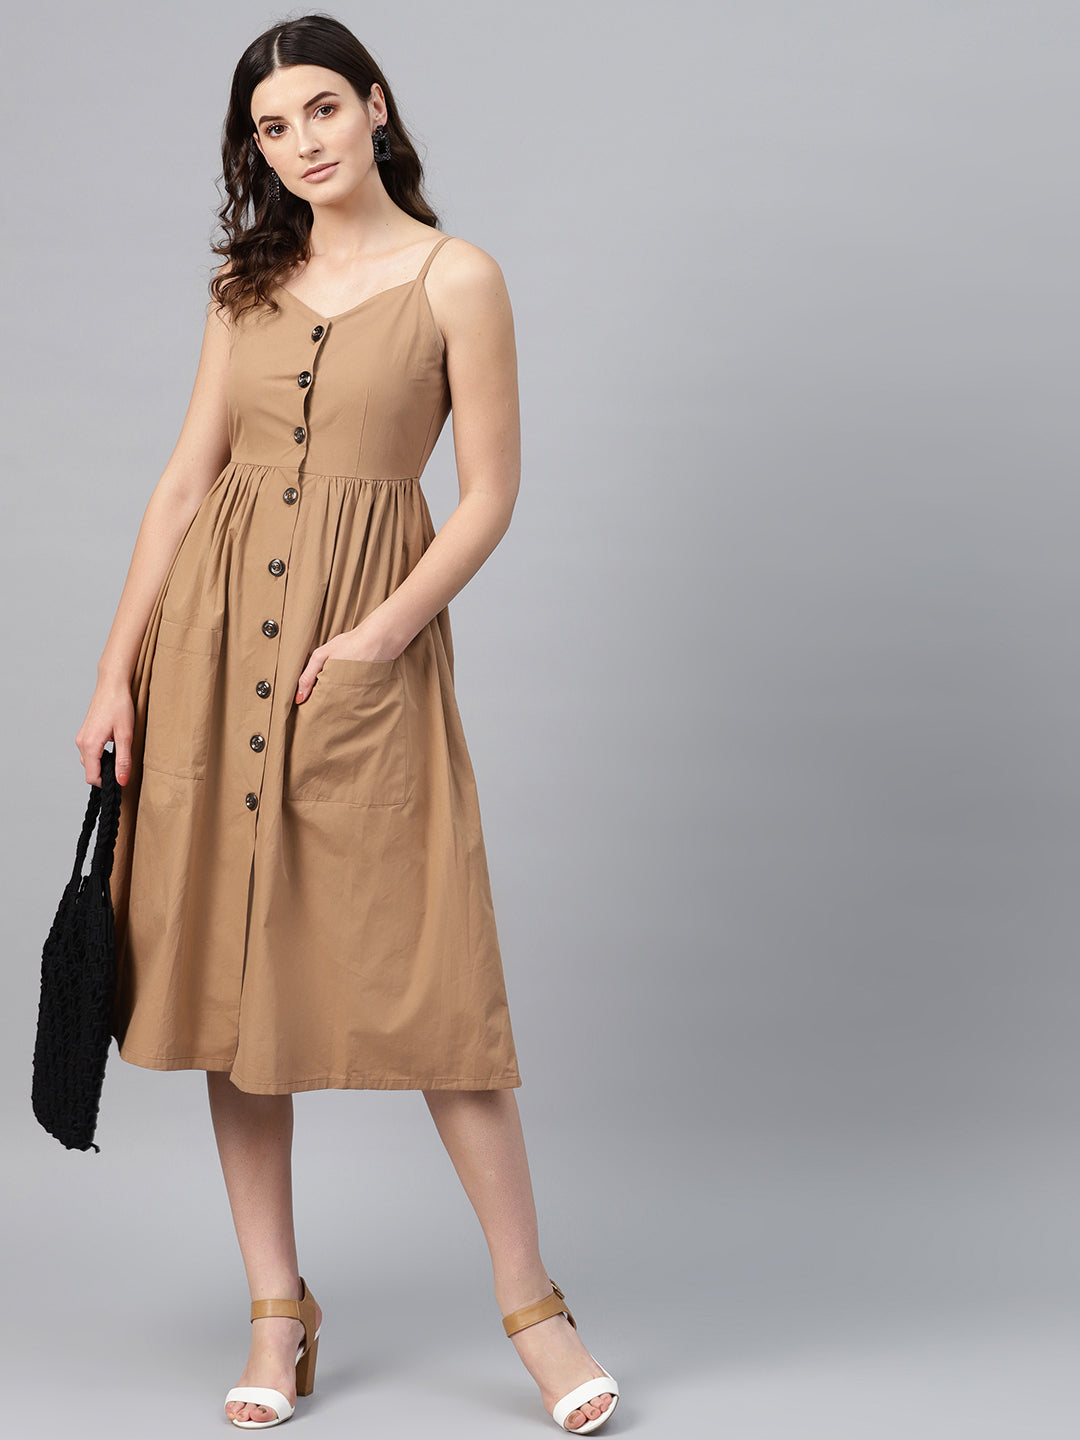 Brown Front Open Strappy Dress